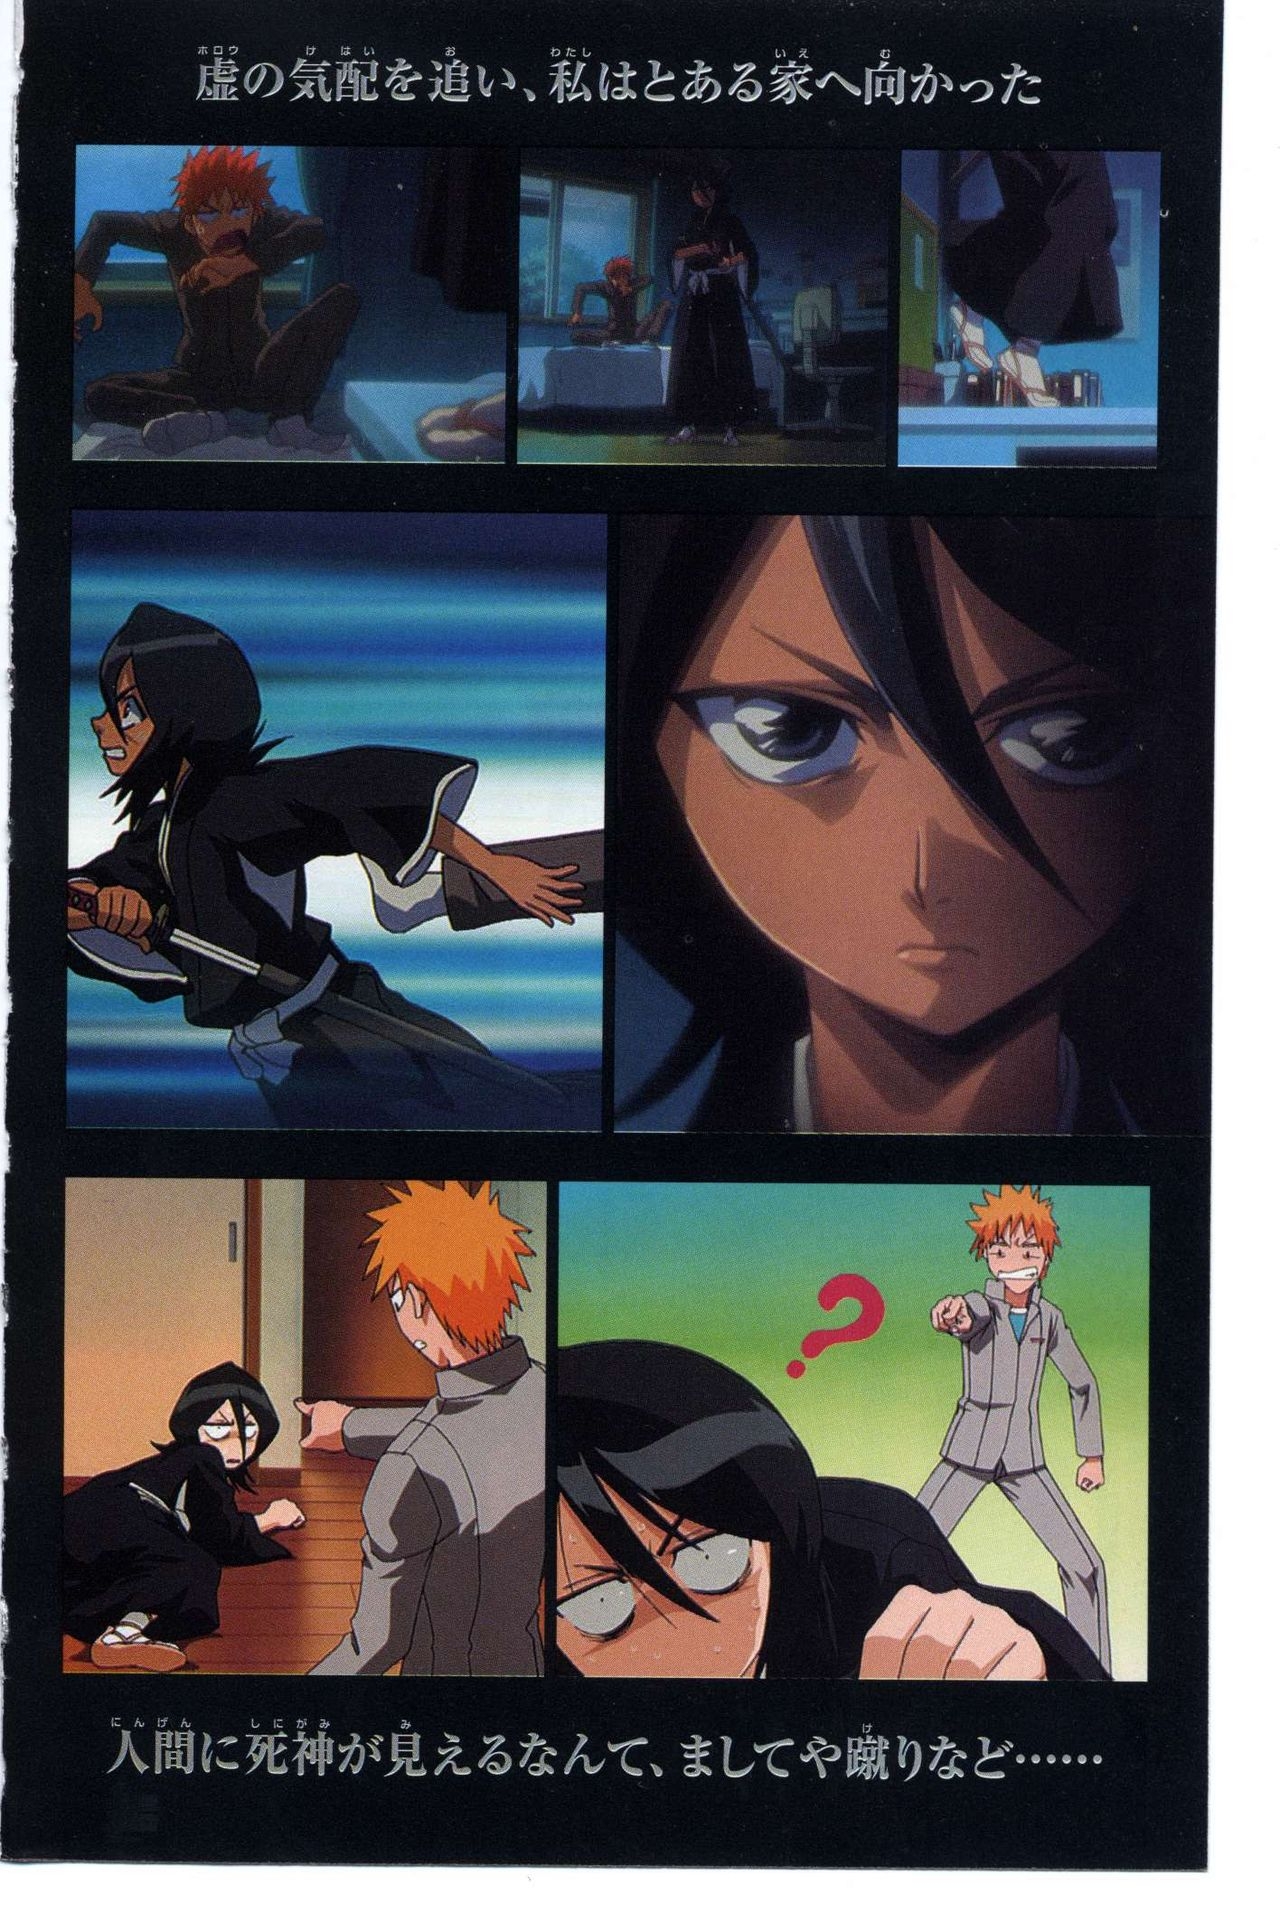 Bleach: Official Animation Book VIBEs 10